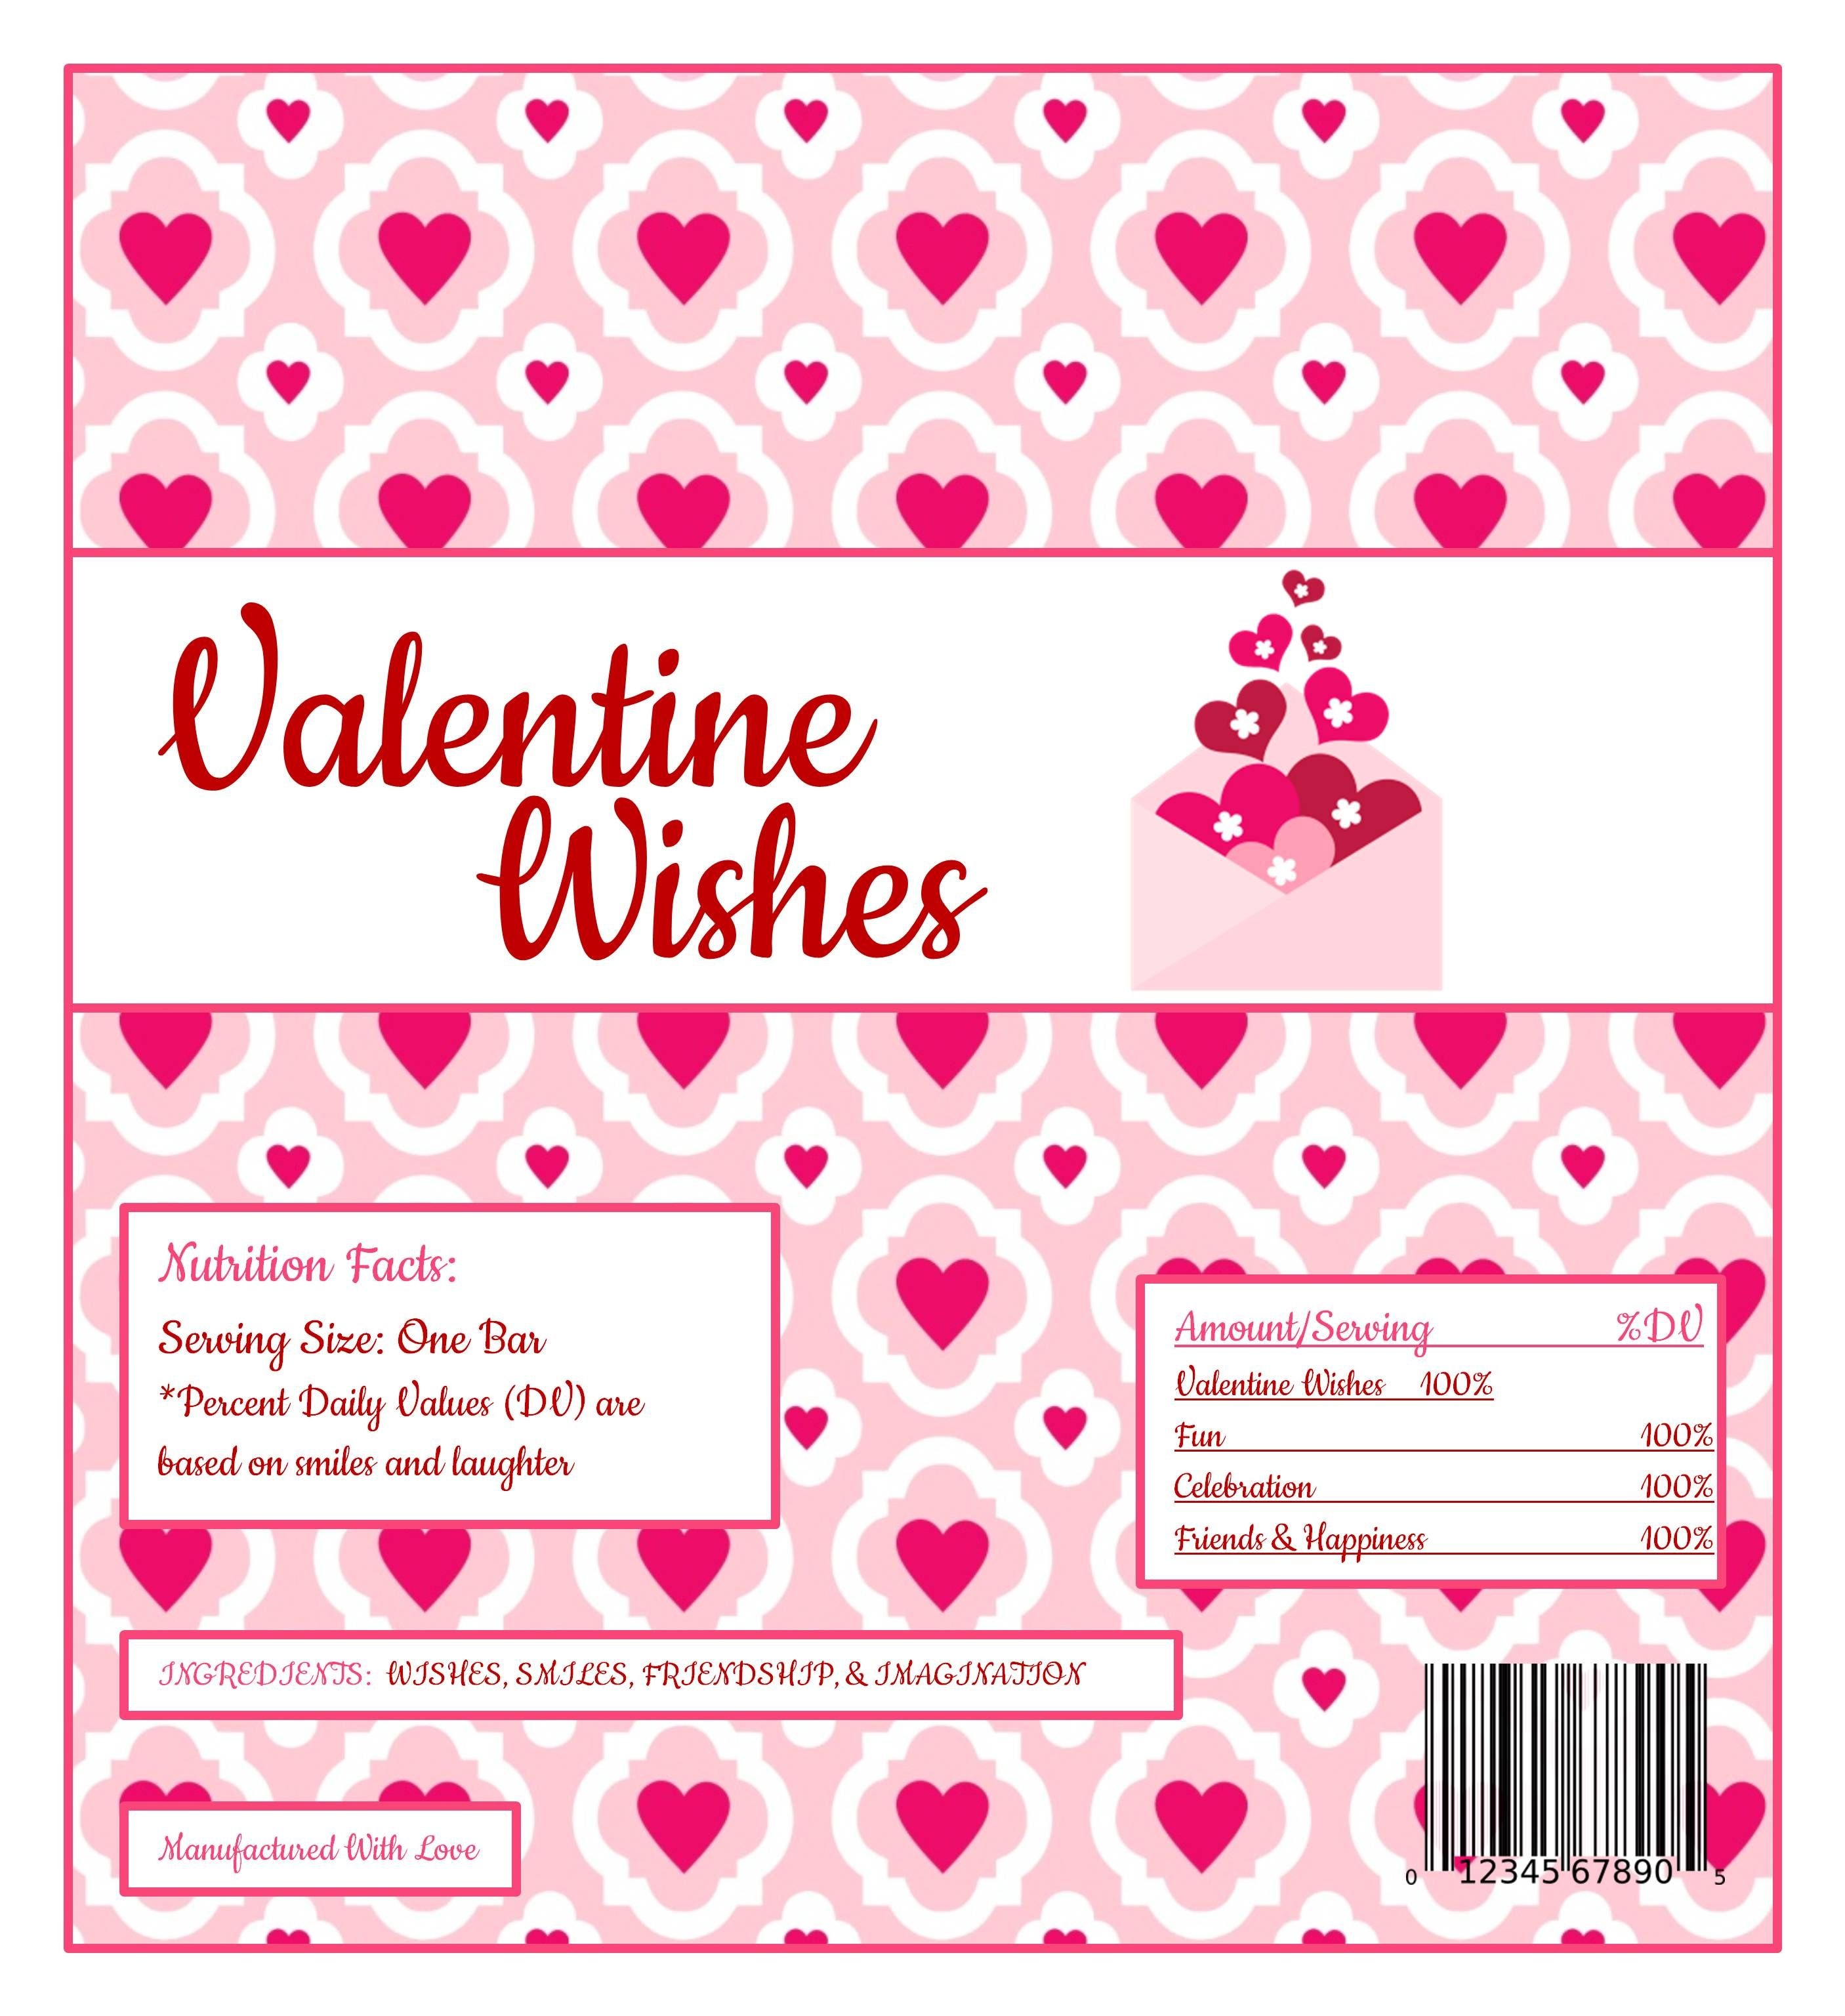 Free Printable Candy Wrapper | Valentines Day Parties &amp;amp; Ideas - Free Candy Wrapper Printable